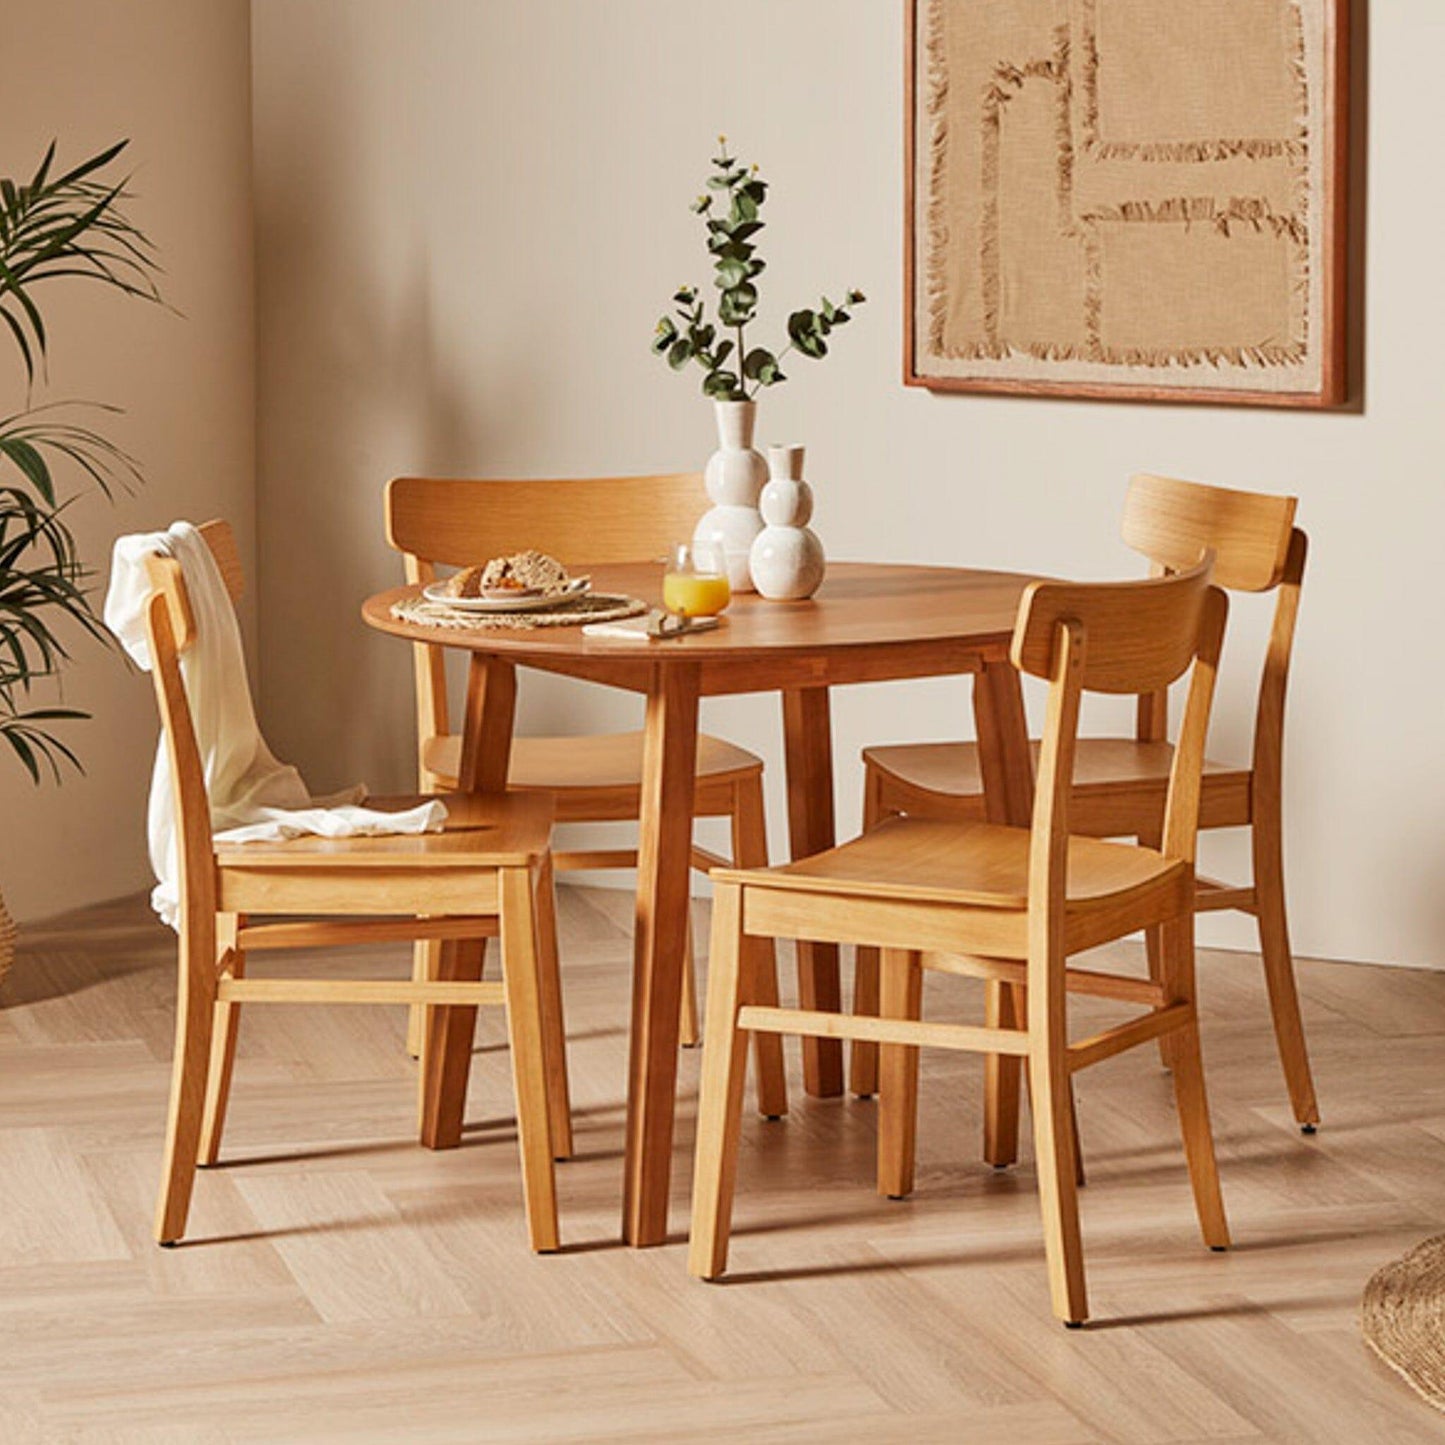 Charlie Dining Table Set - 4 Seater - Oak Wooden Chairs